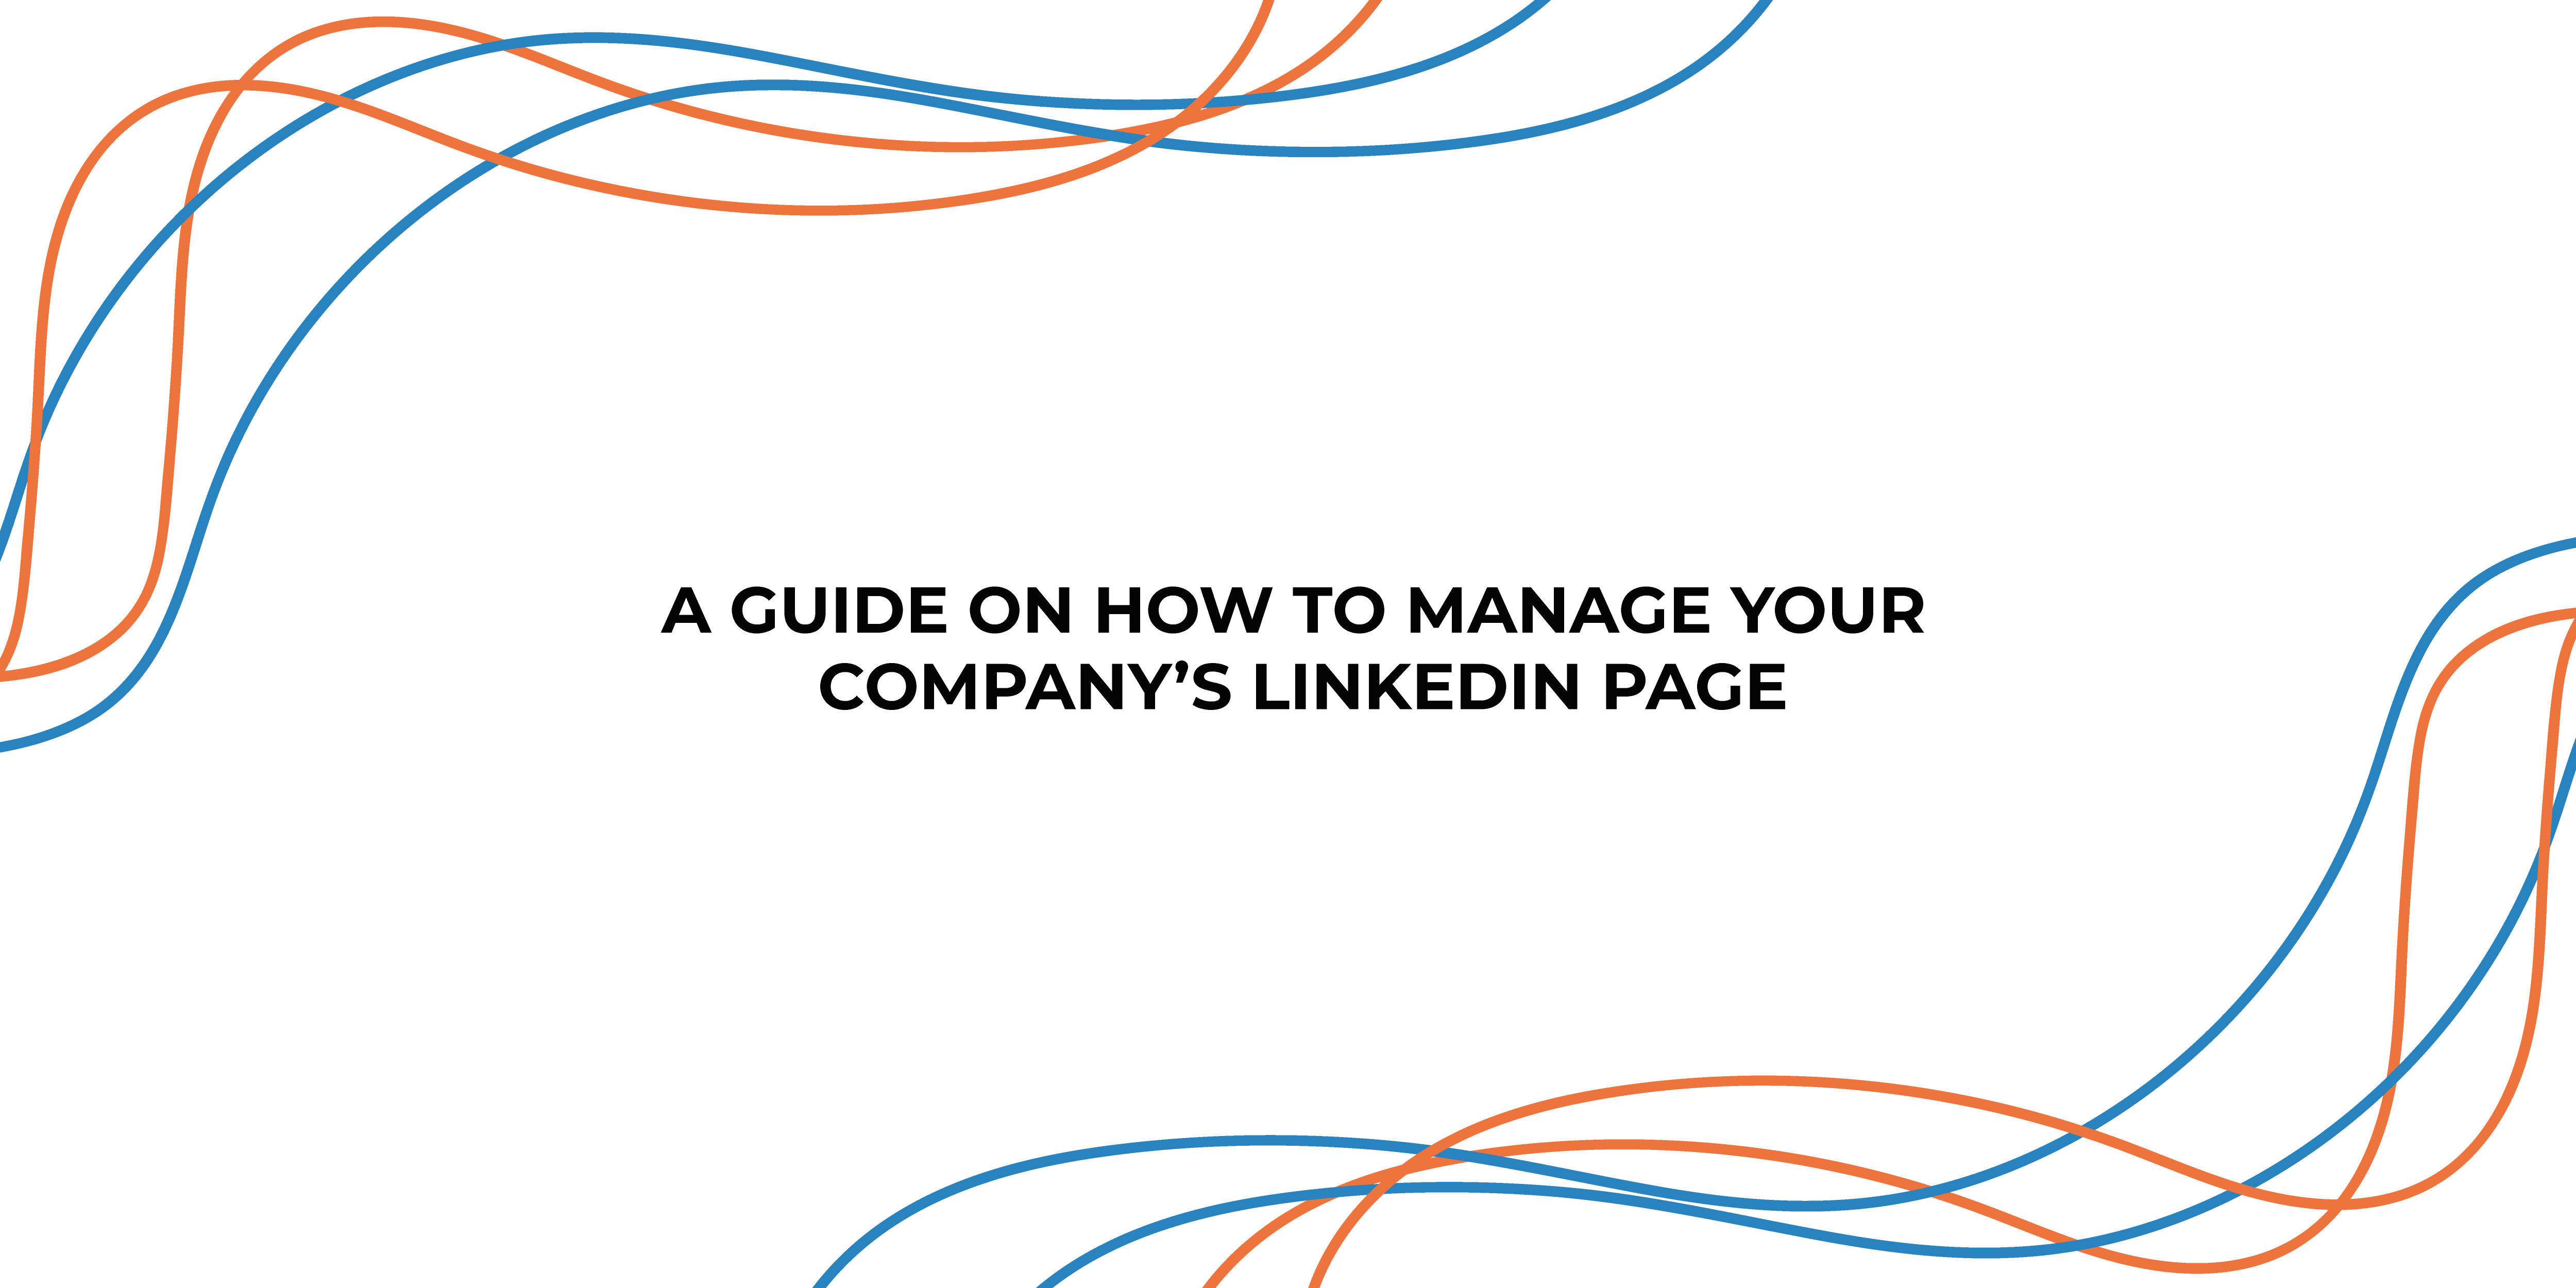 A-Guide-on-How-to-Manage-Your-Company’s-LinkedIn-Page